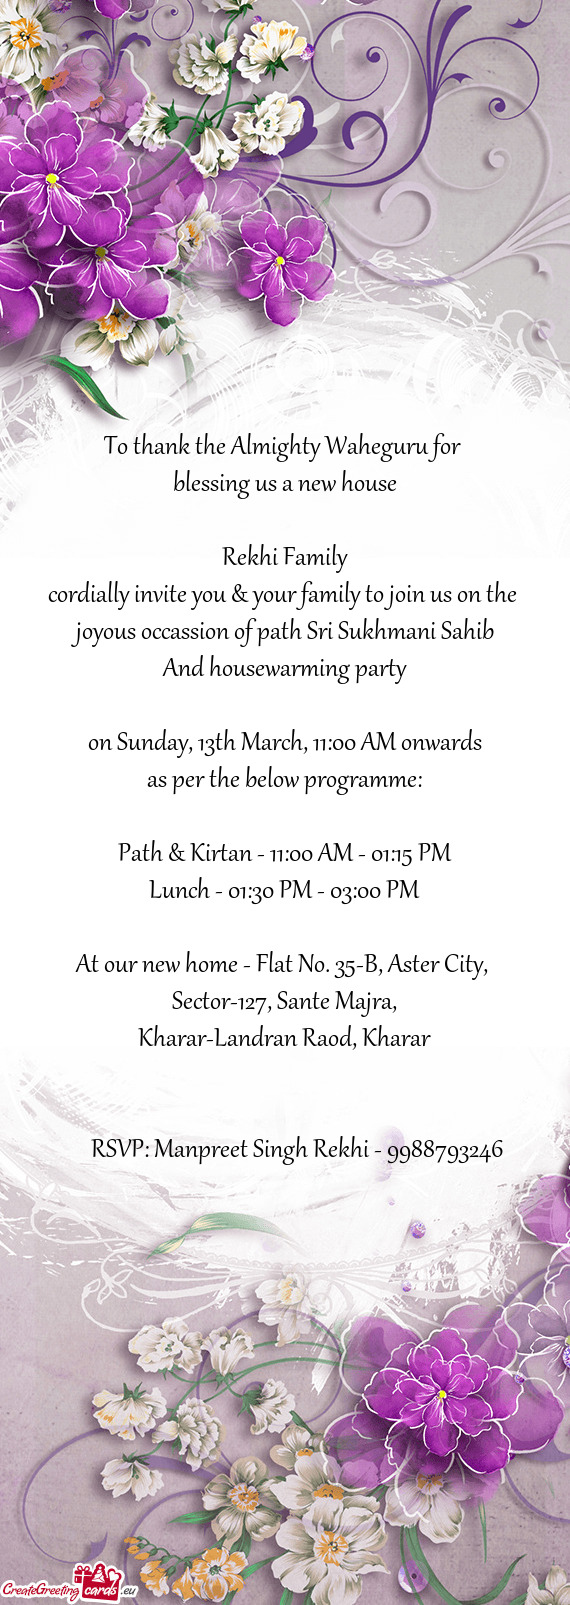 On Sunday, 13th March, 11:00 AM onwards